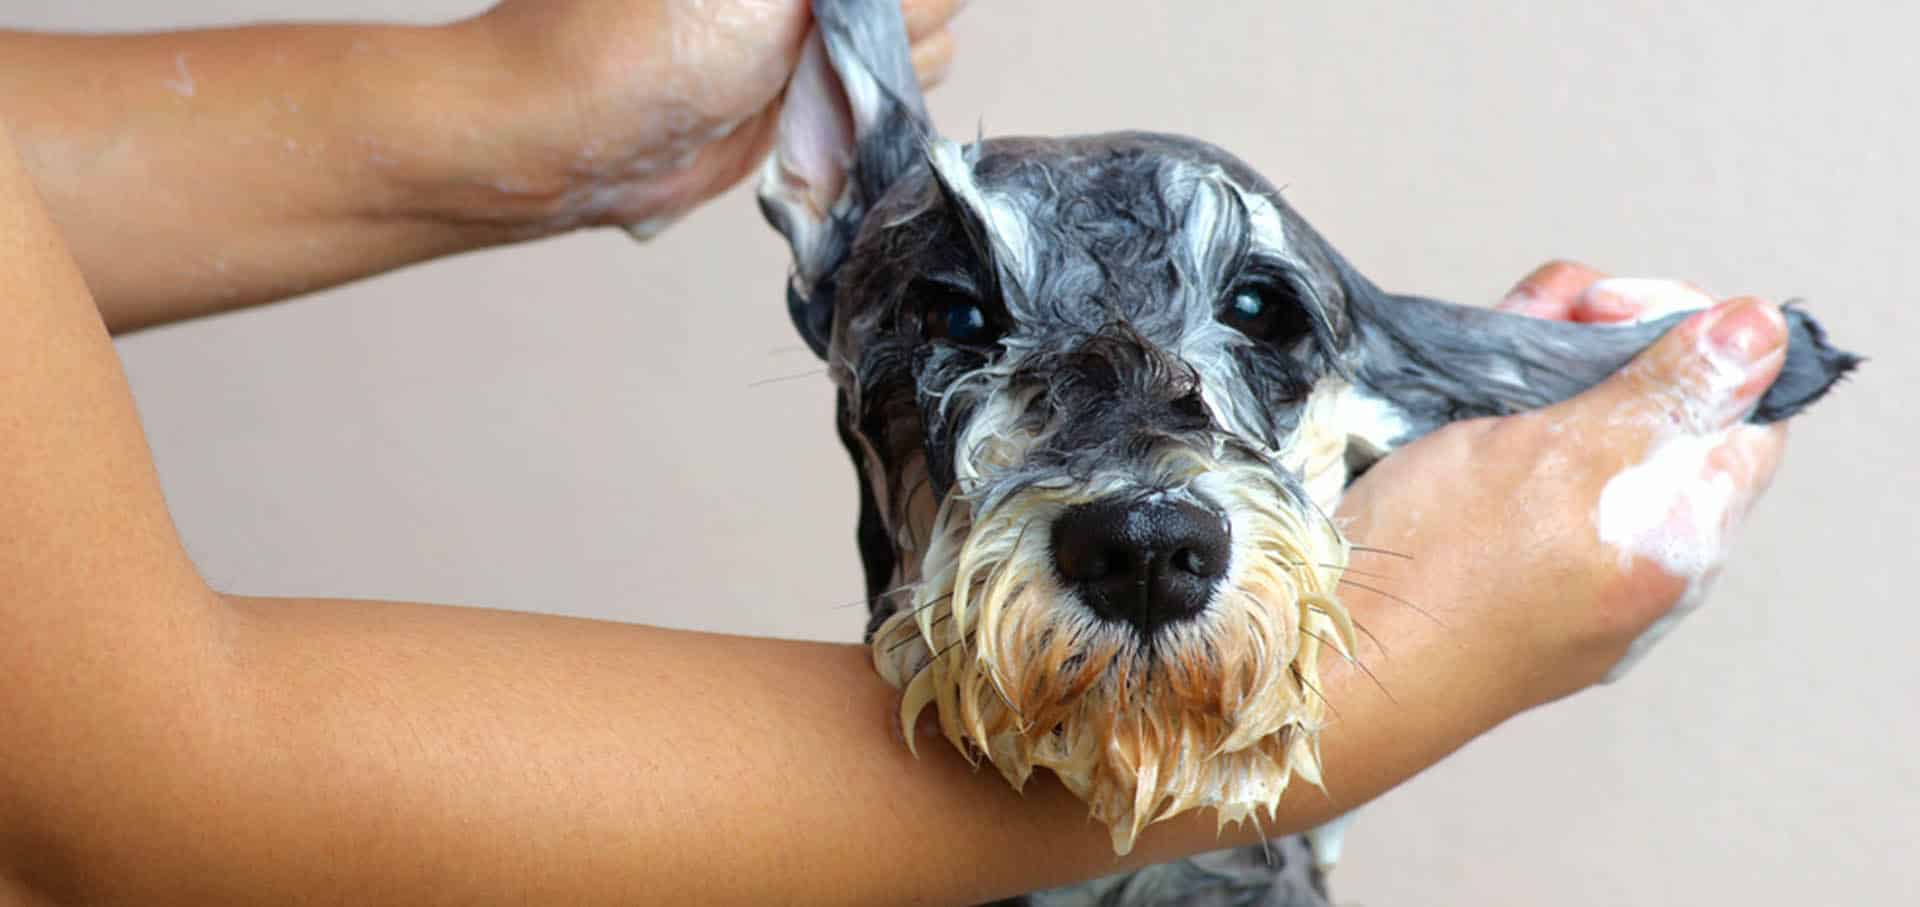 Face of a dog getting washed — Best Veterinary Services in Bundaberg, QLD